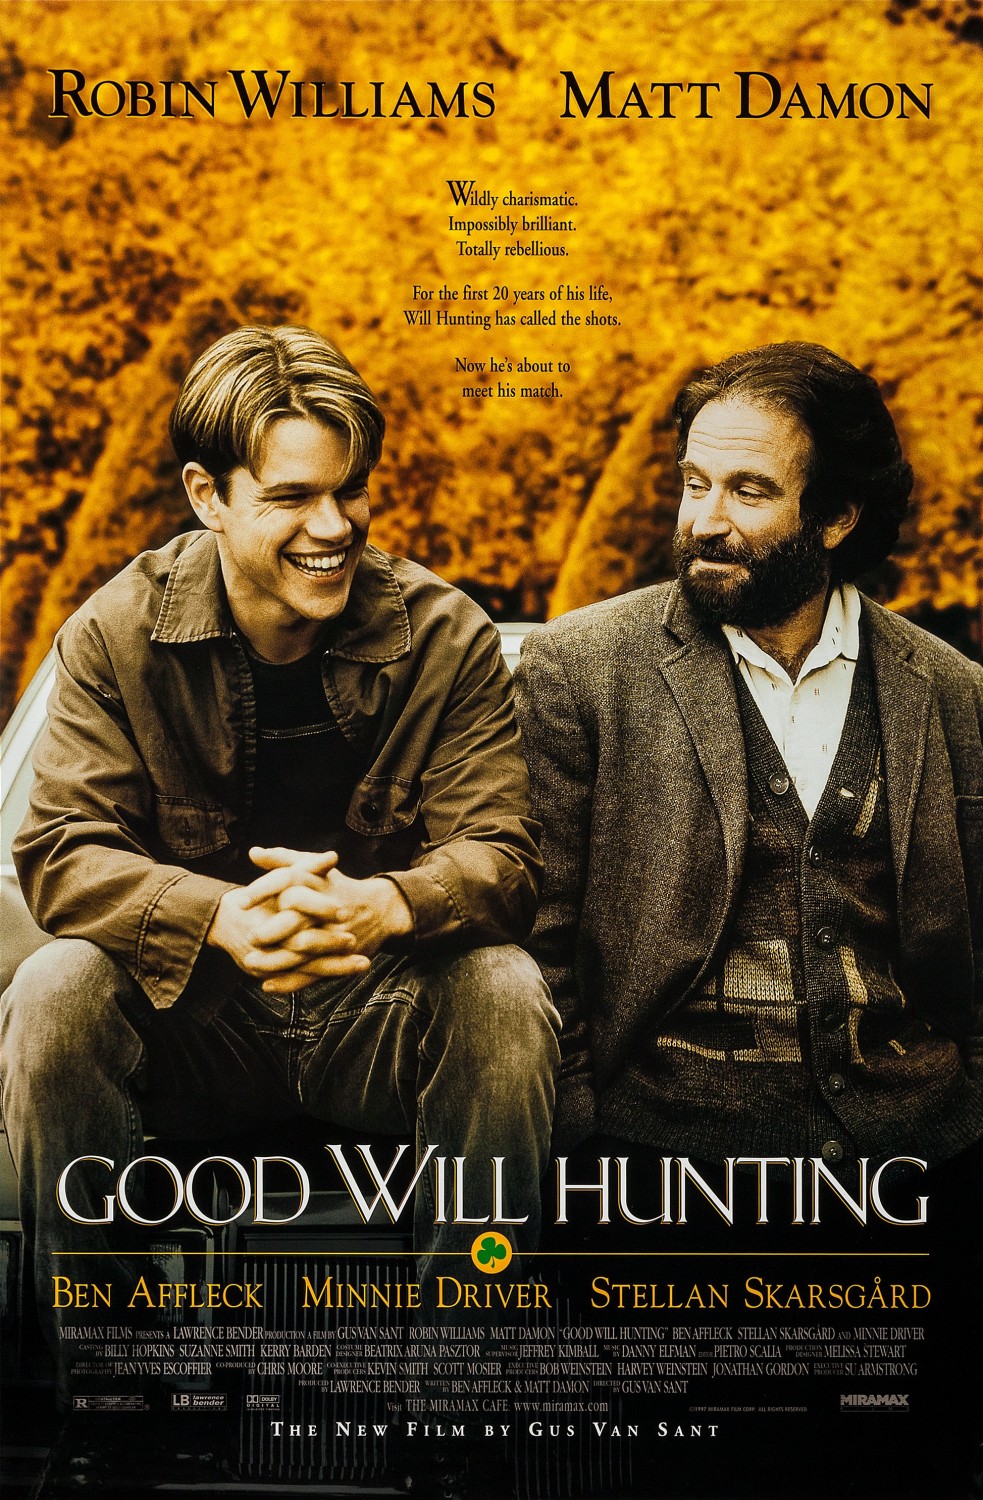 Will Hunting, a genius in mathematics, solves all the difficult mathematical problems. When he faces an emotional crisis, he takes help from psychiatrist Dr Sean Maguireto, who helps him recover.